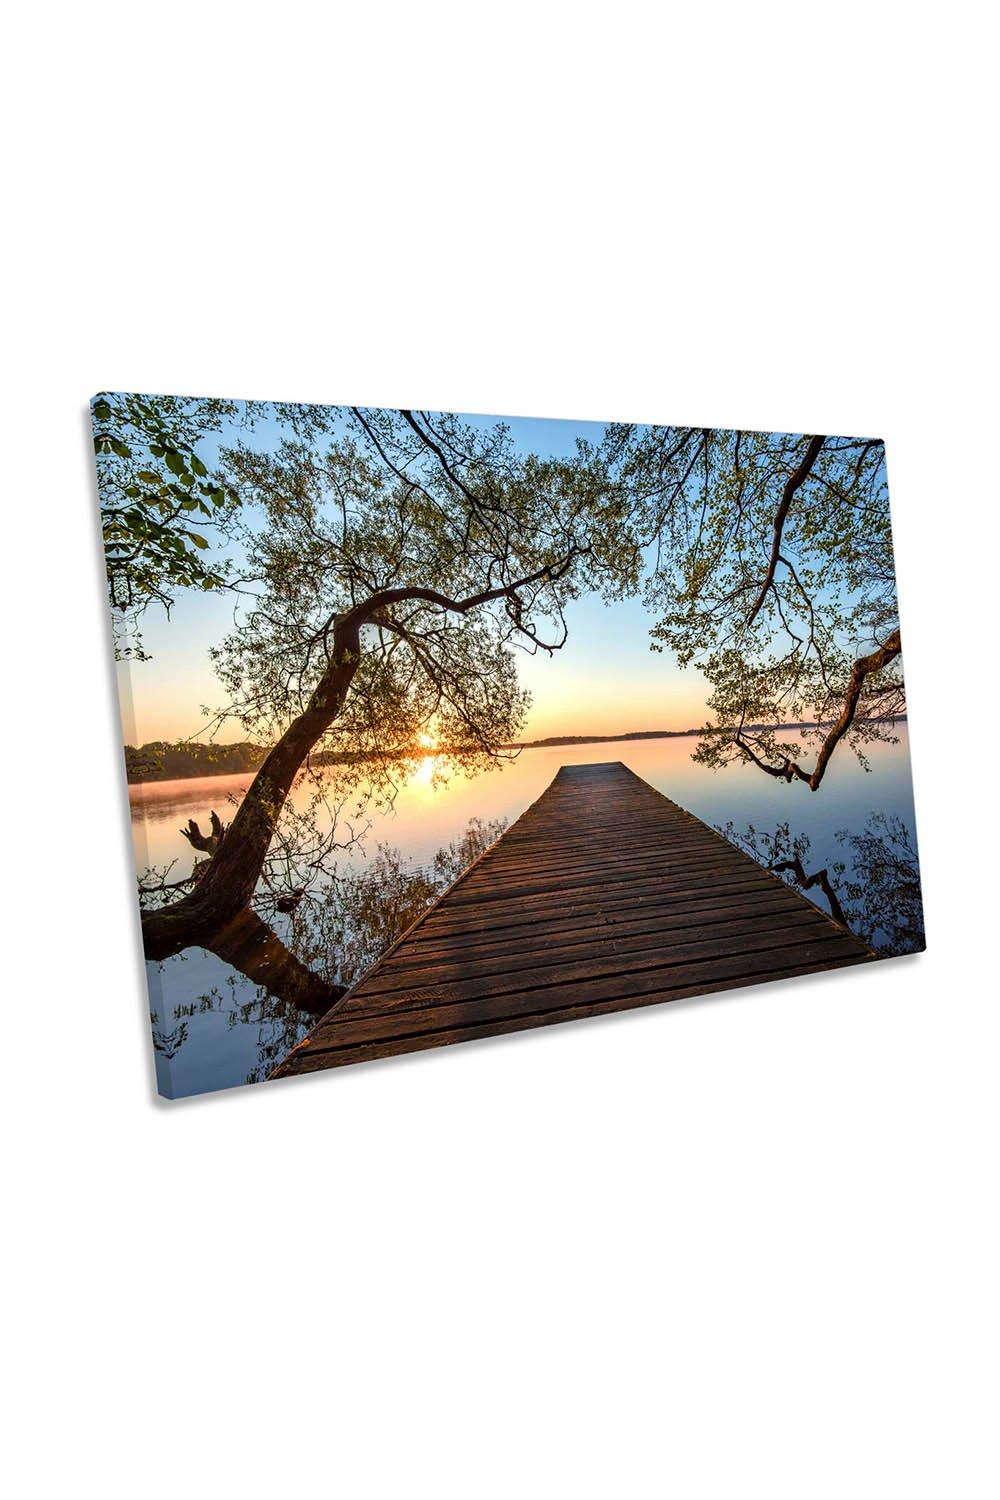 Lake Bridge Branches Sunset Morning Canvas Wall Art Picture Print